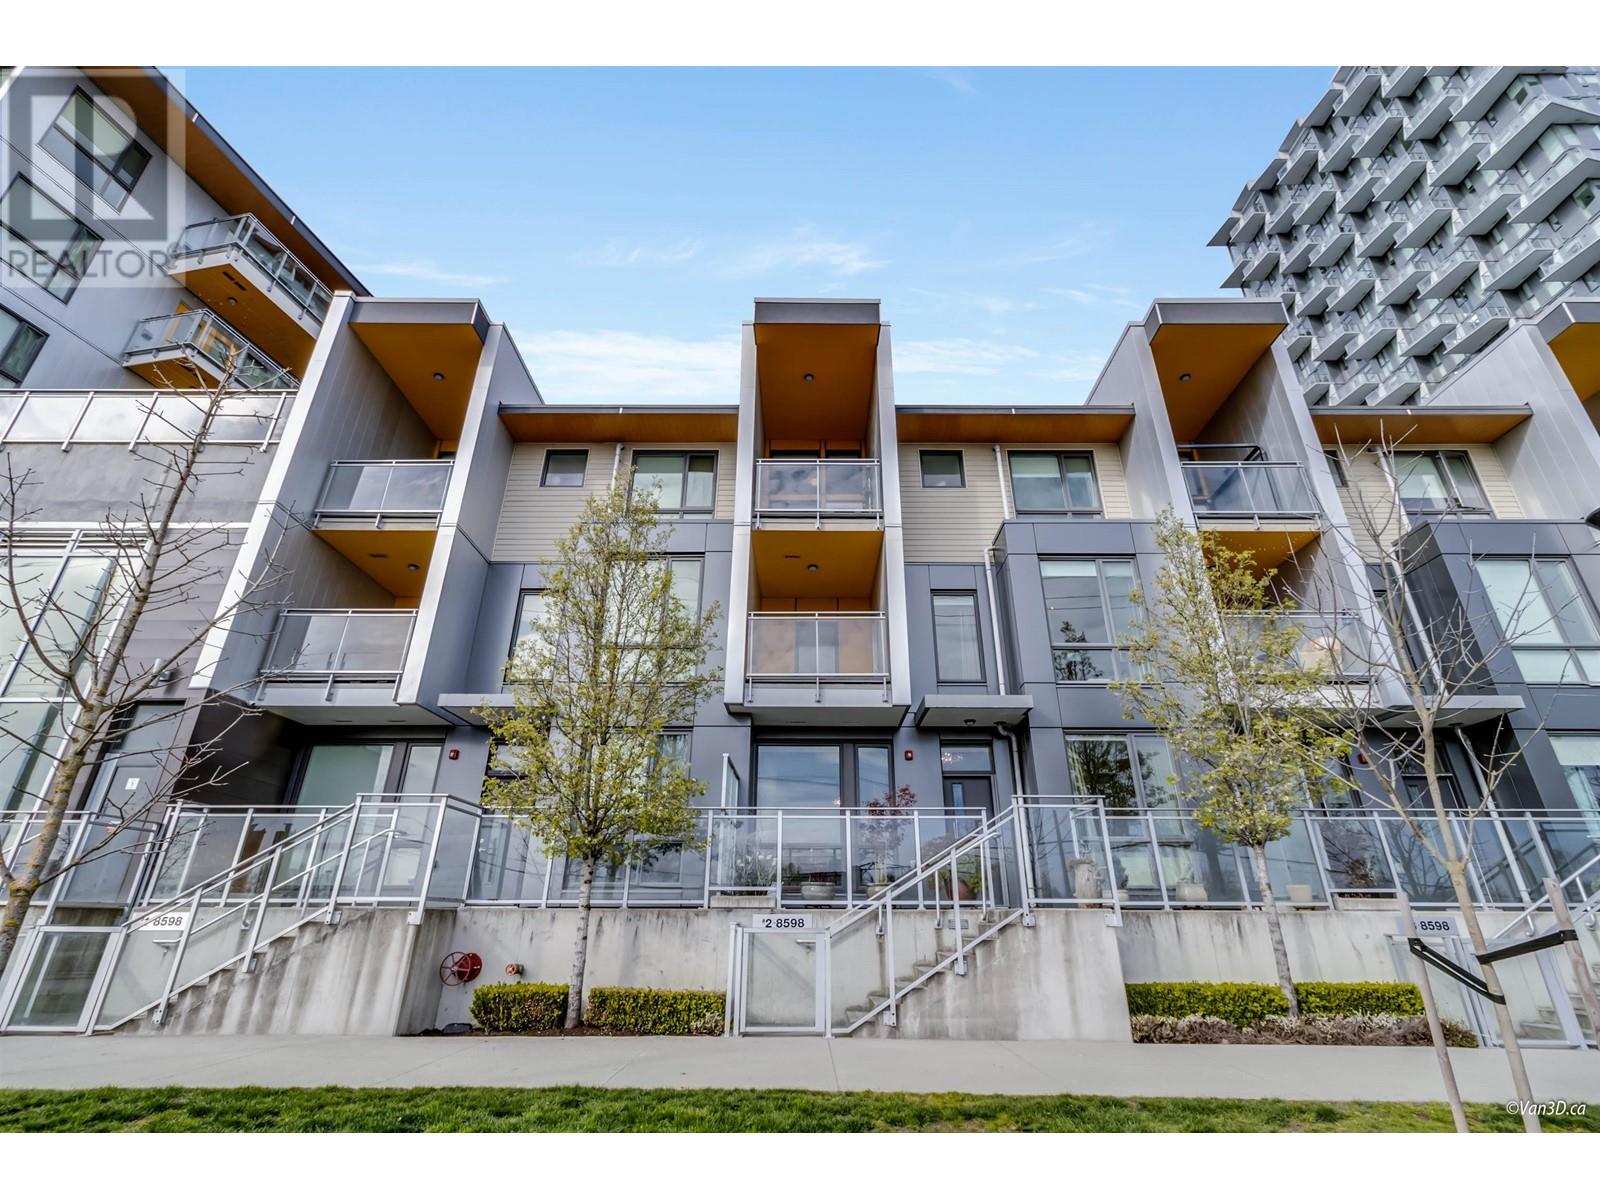 2 8598 RIVER DISTRICT CROSSING, vancouver, British Columbia V5S0C1